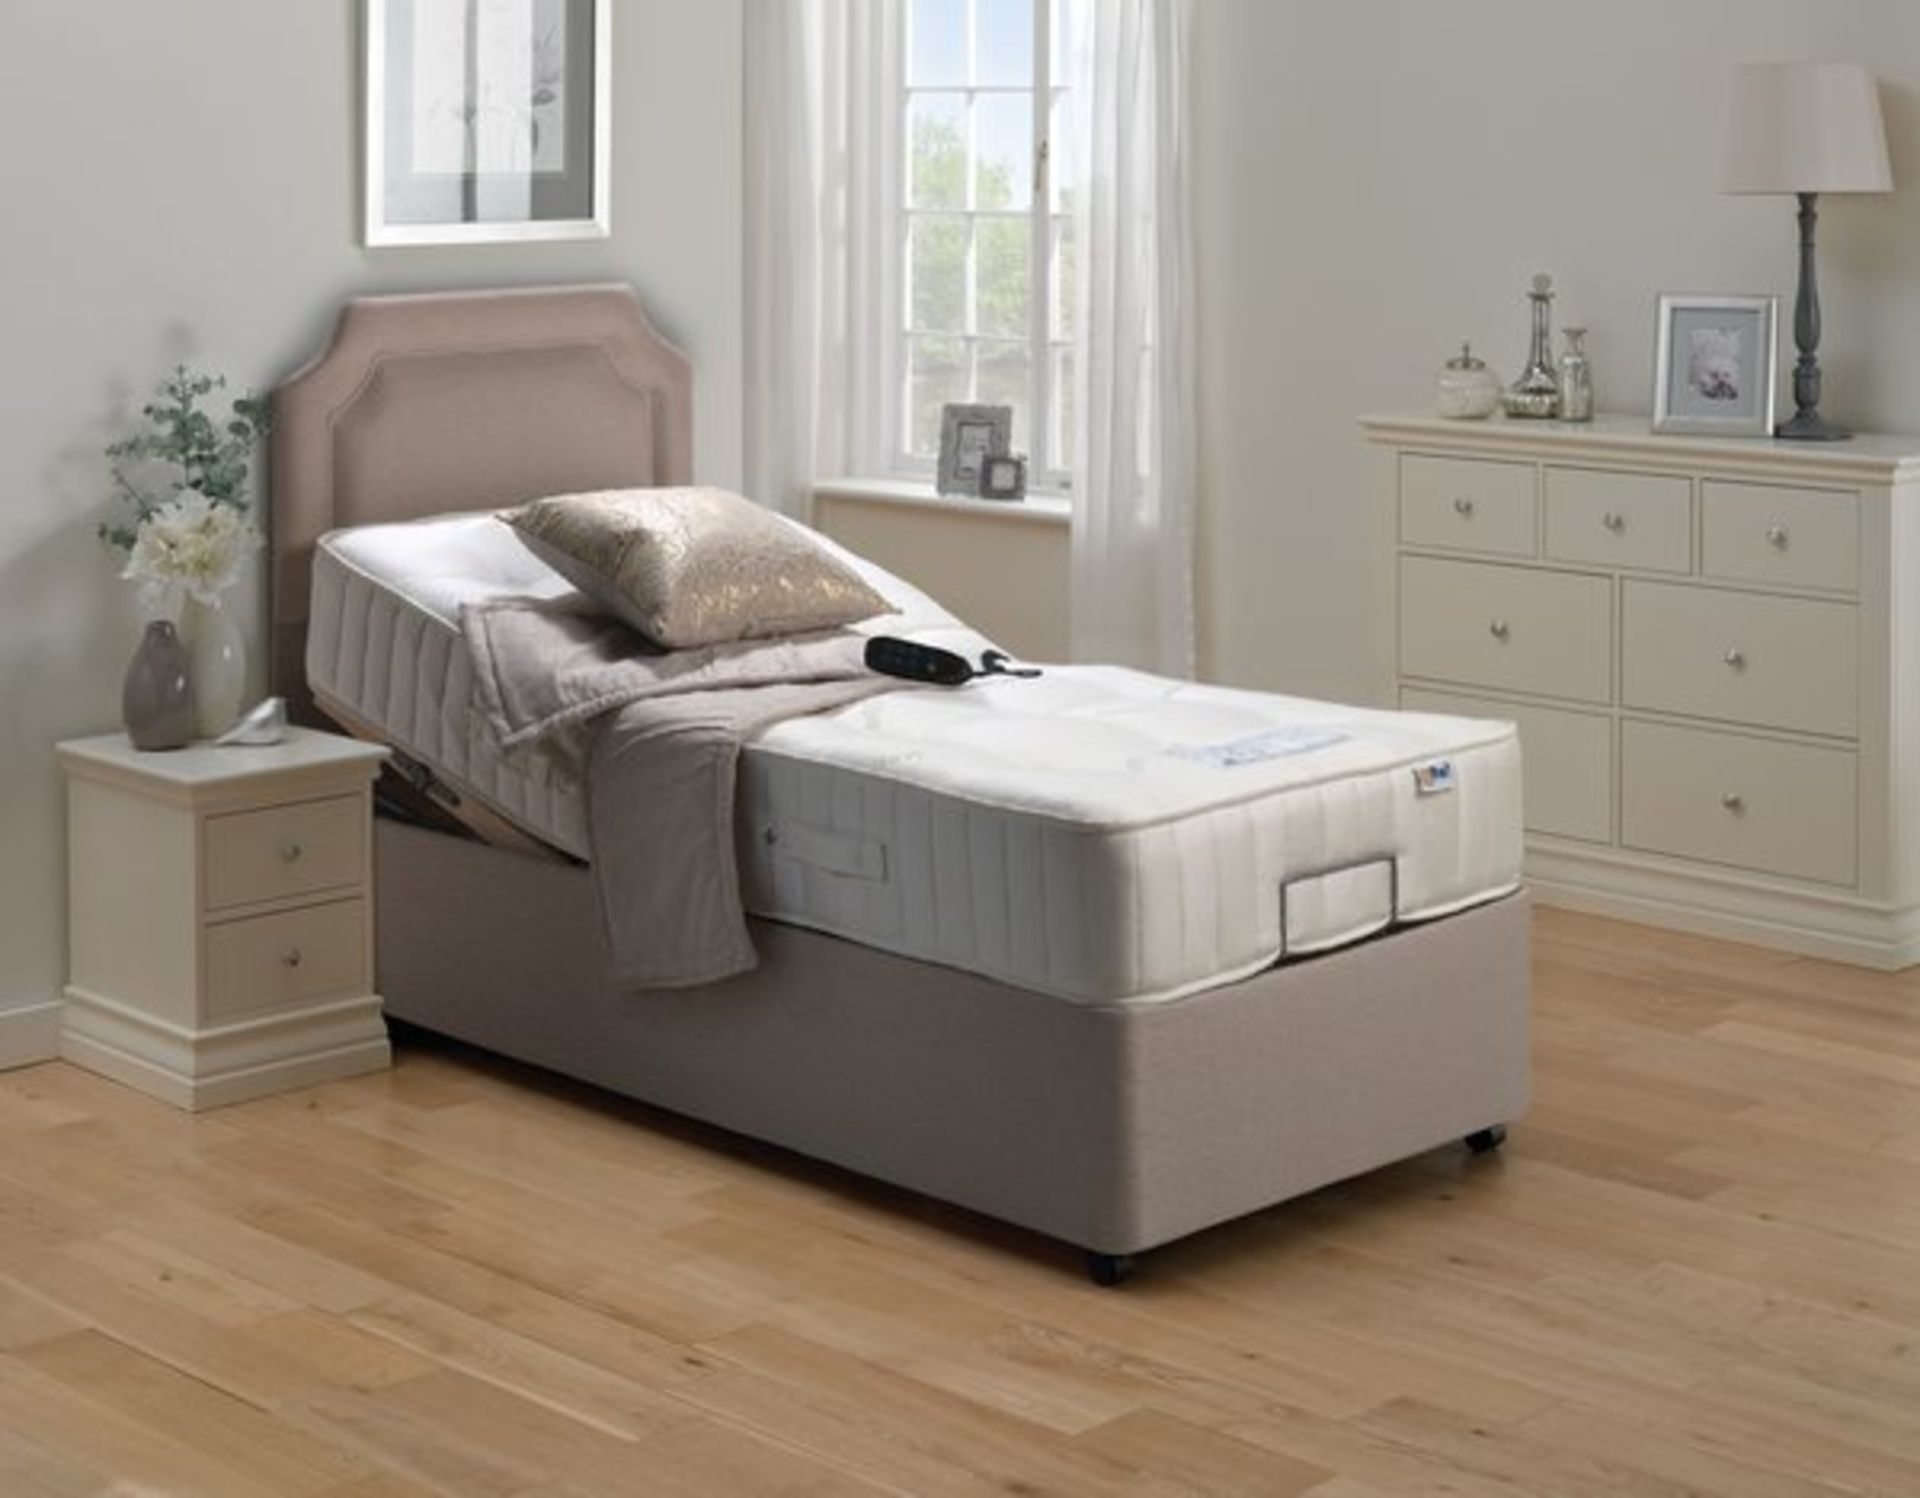 Brand New 3ê0 Single Alpina Adjustable Electric Bed With Pocket Sprung Mattress - Image 3 of 3